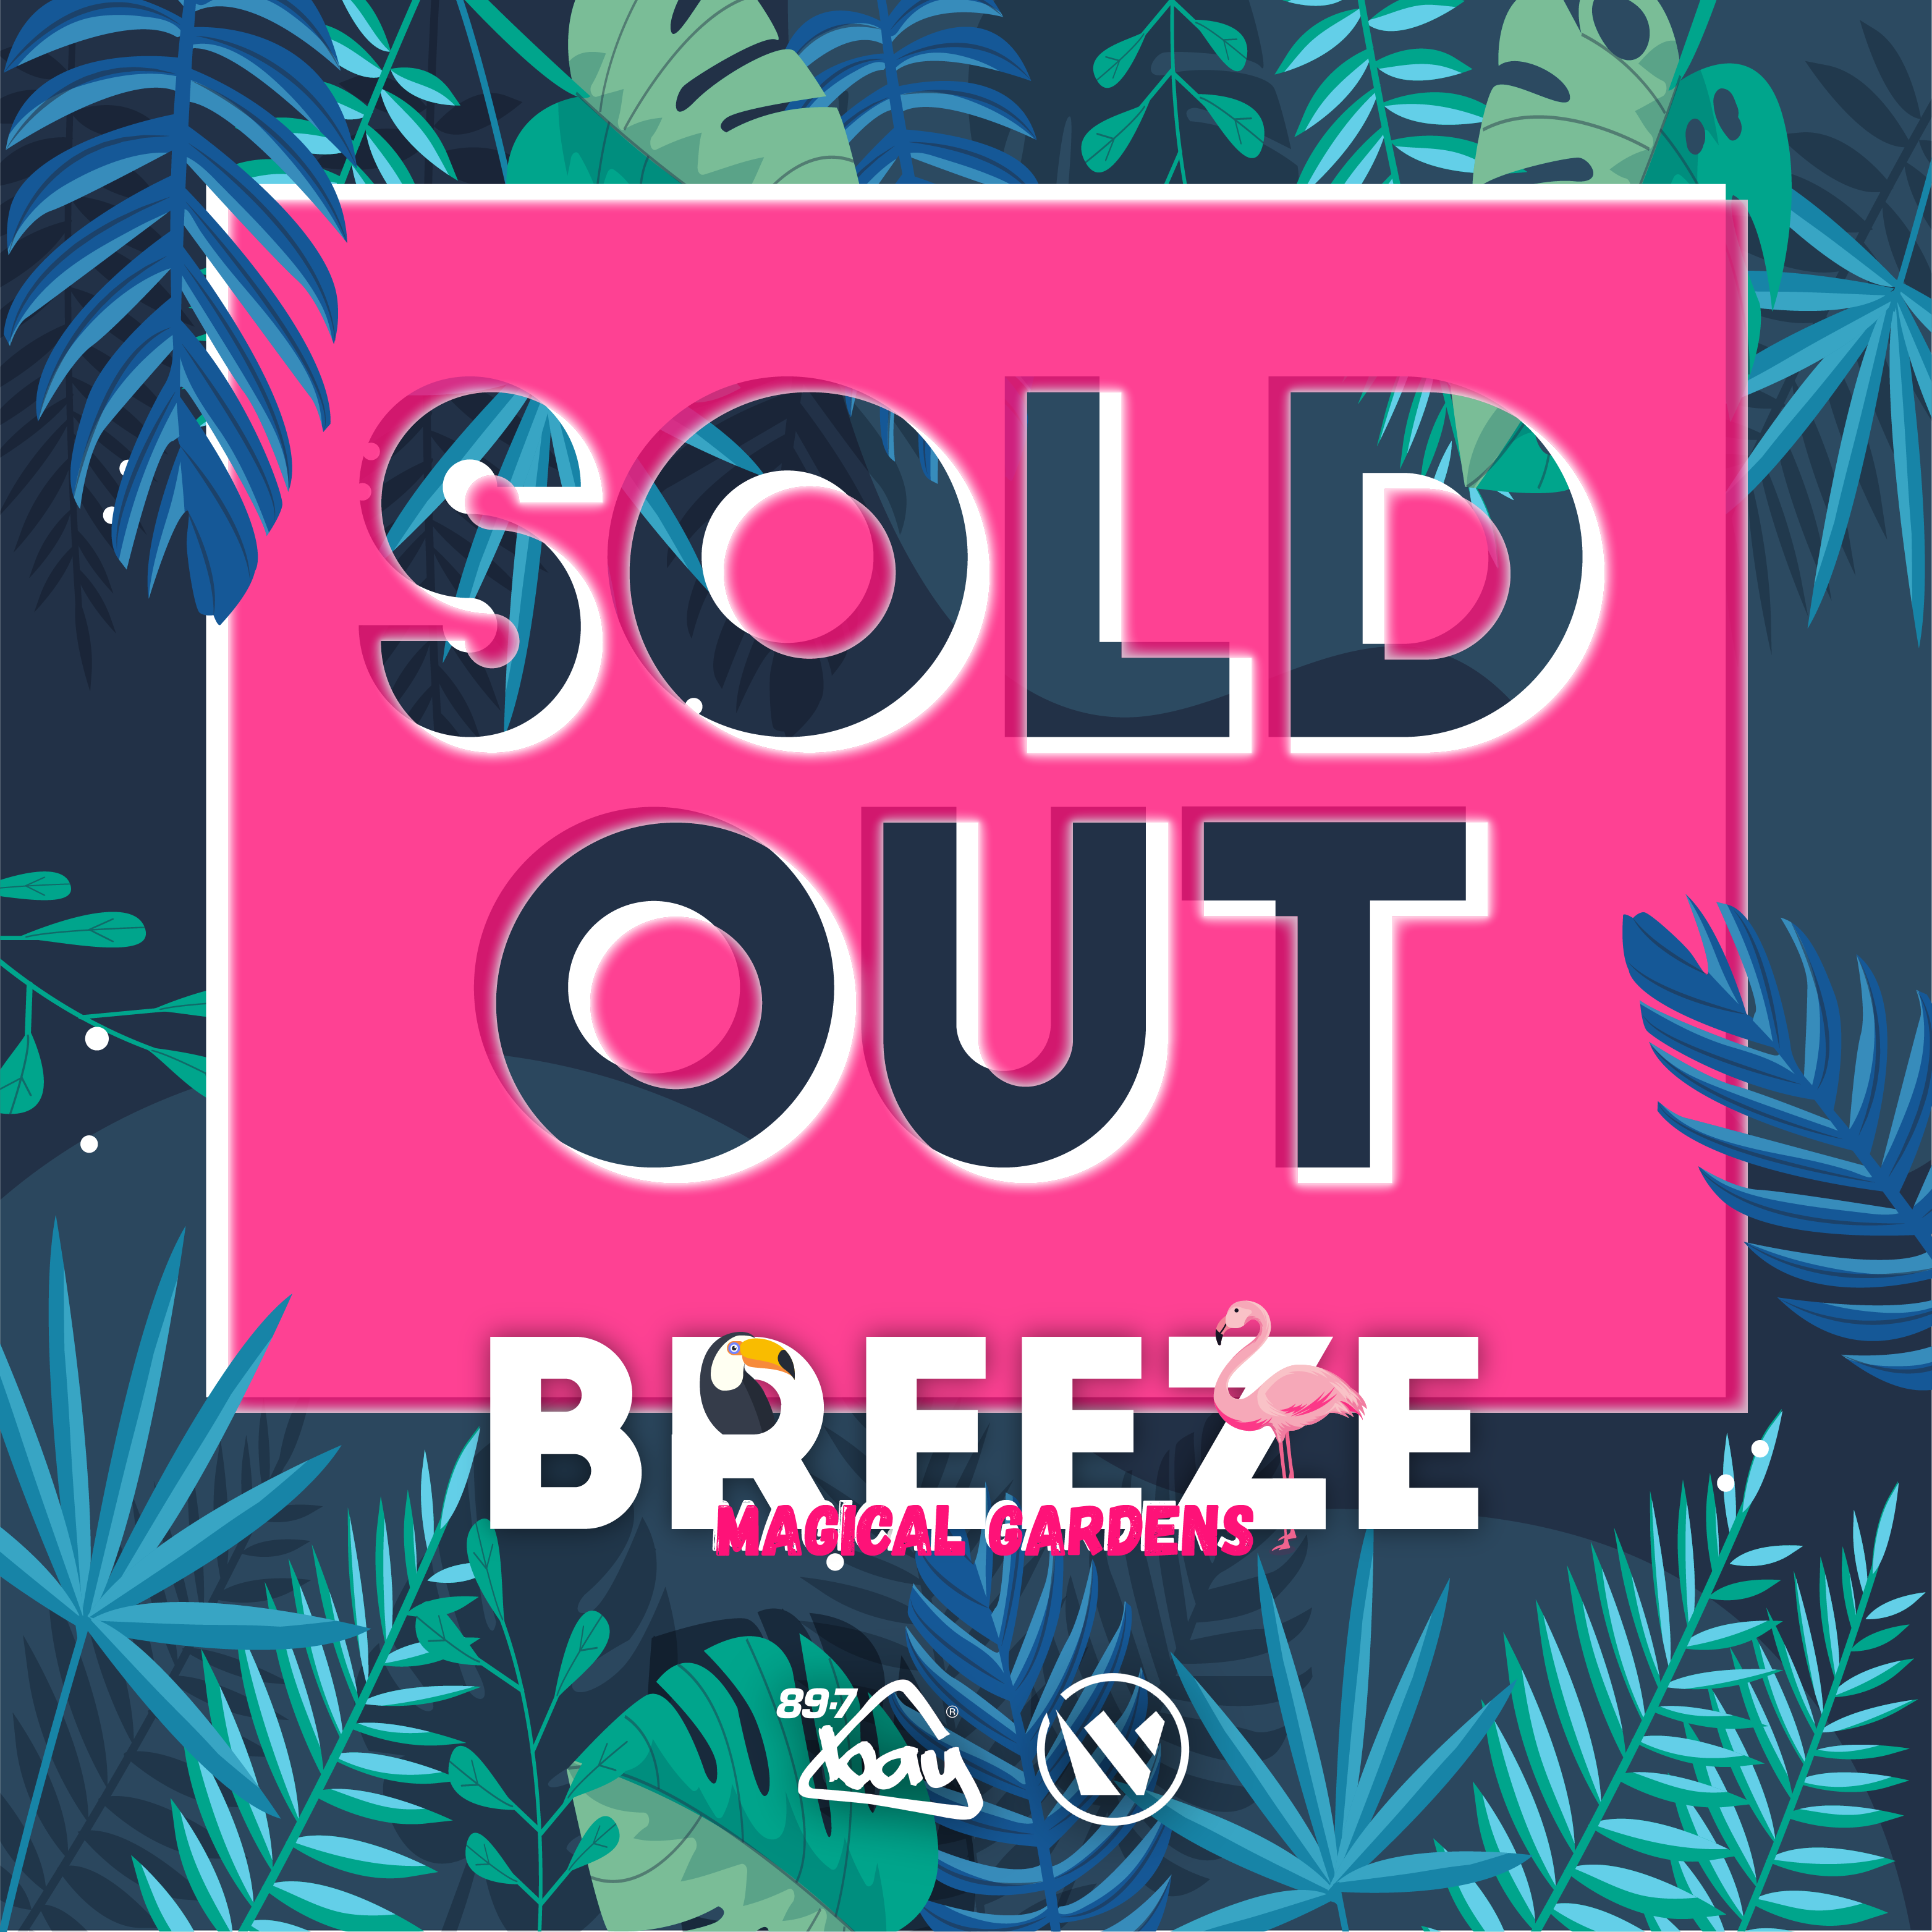 Design of Sold Out Event Post